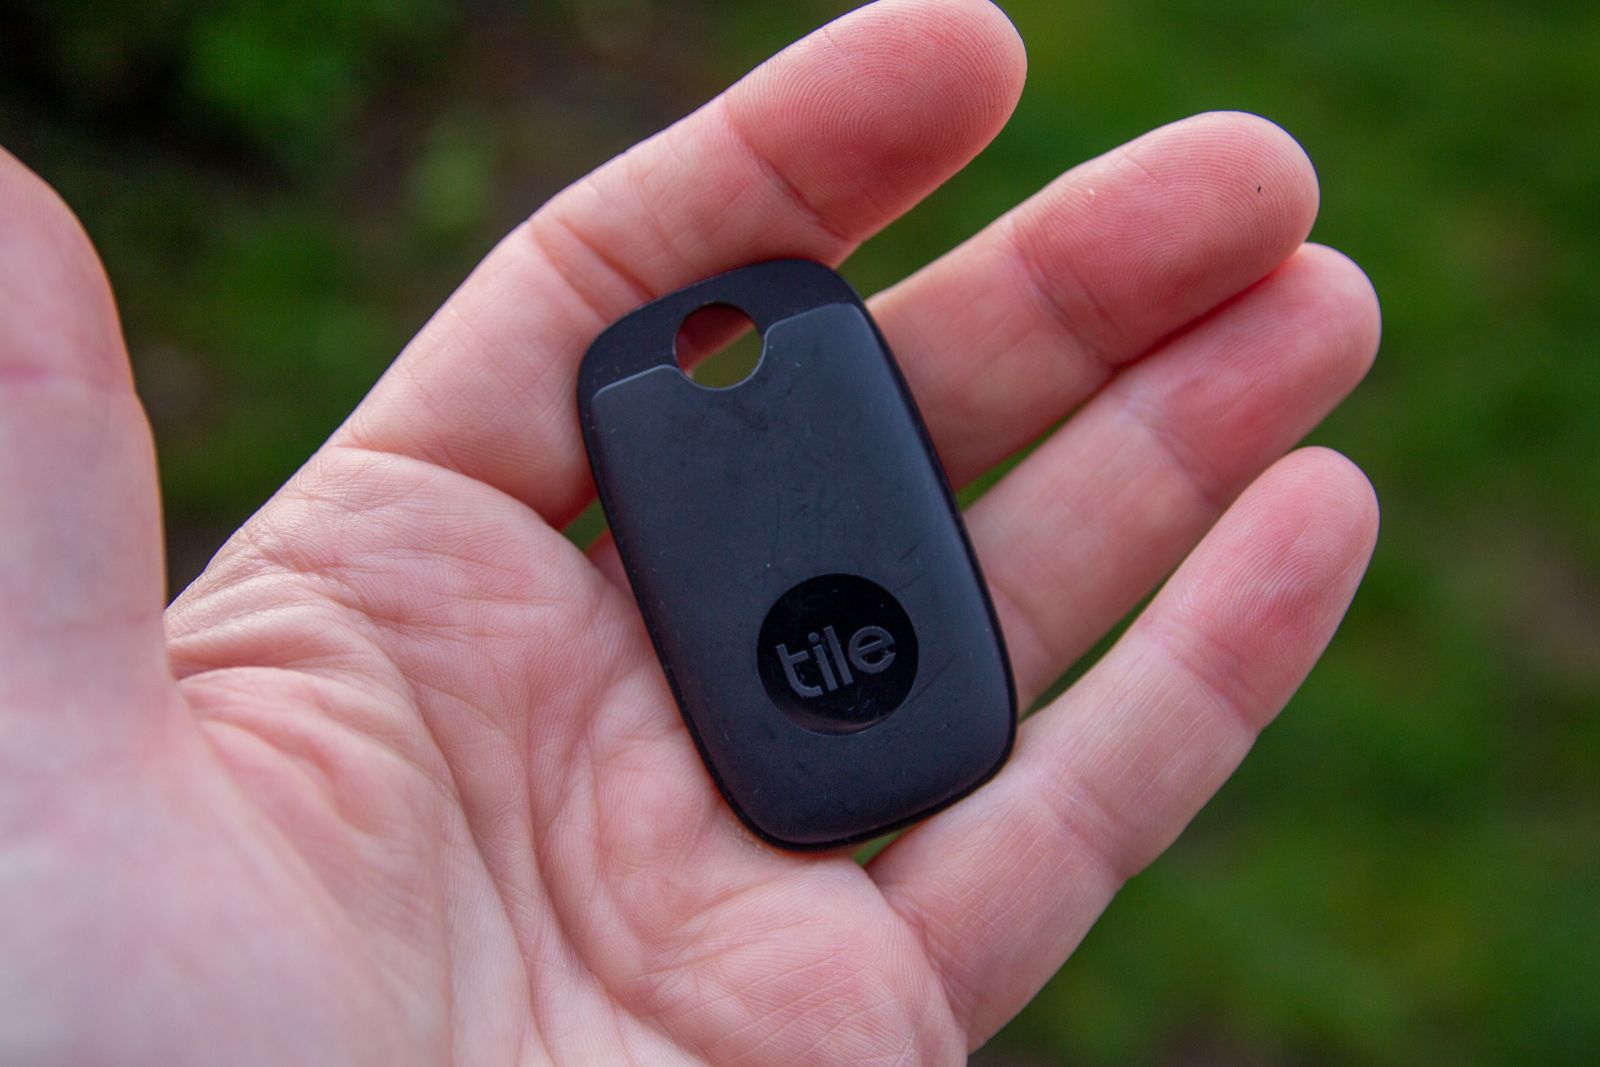 Review: Tile Sticker is a Great, Tiny, Adhesive Bluetooth Tracker